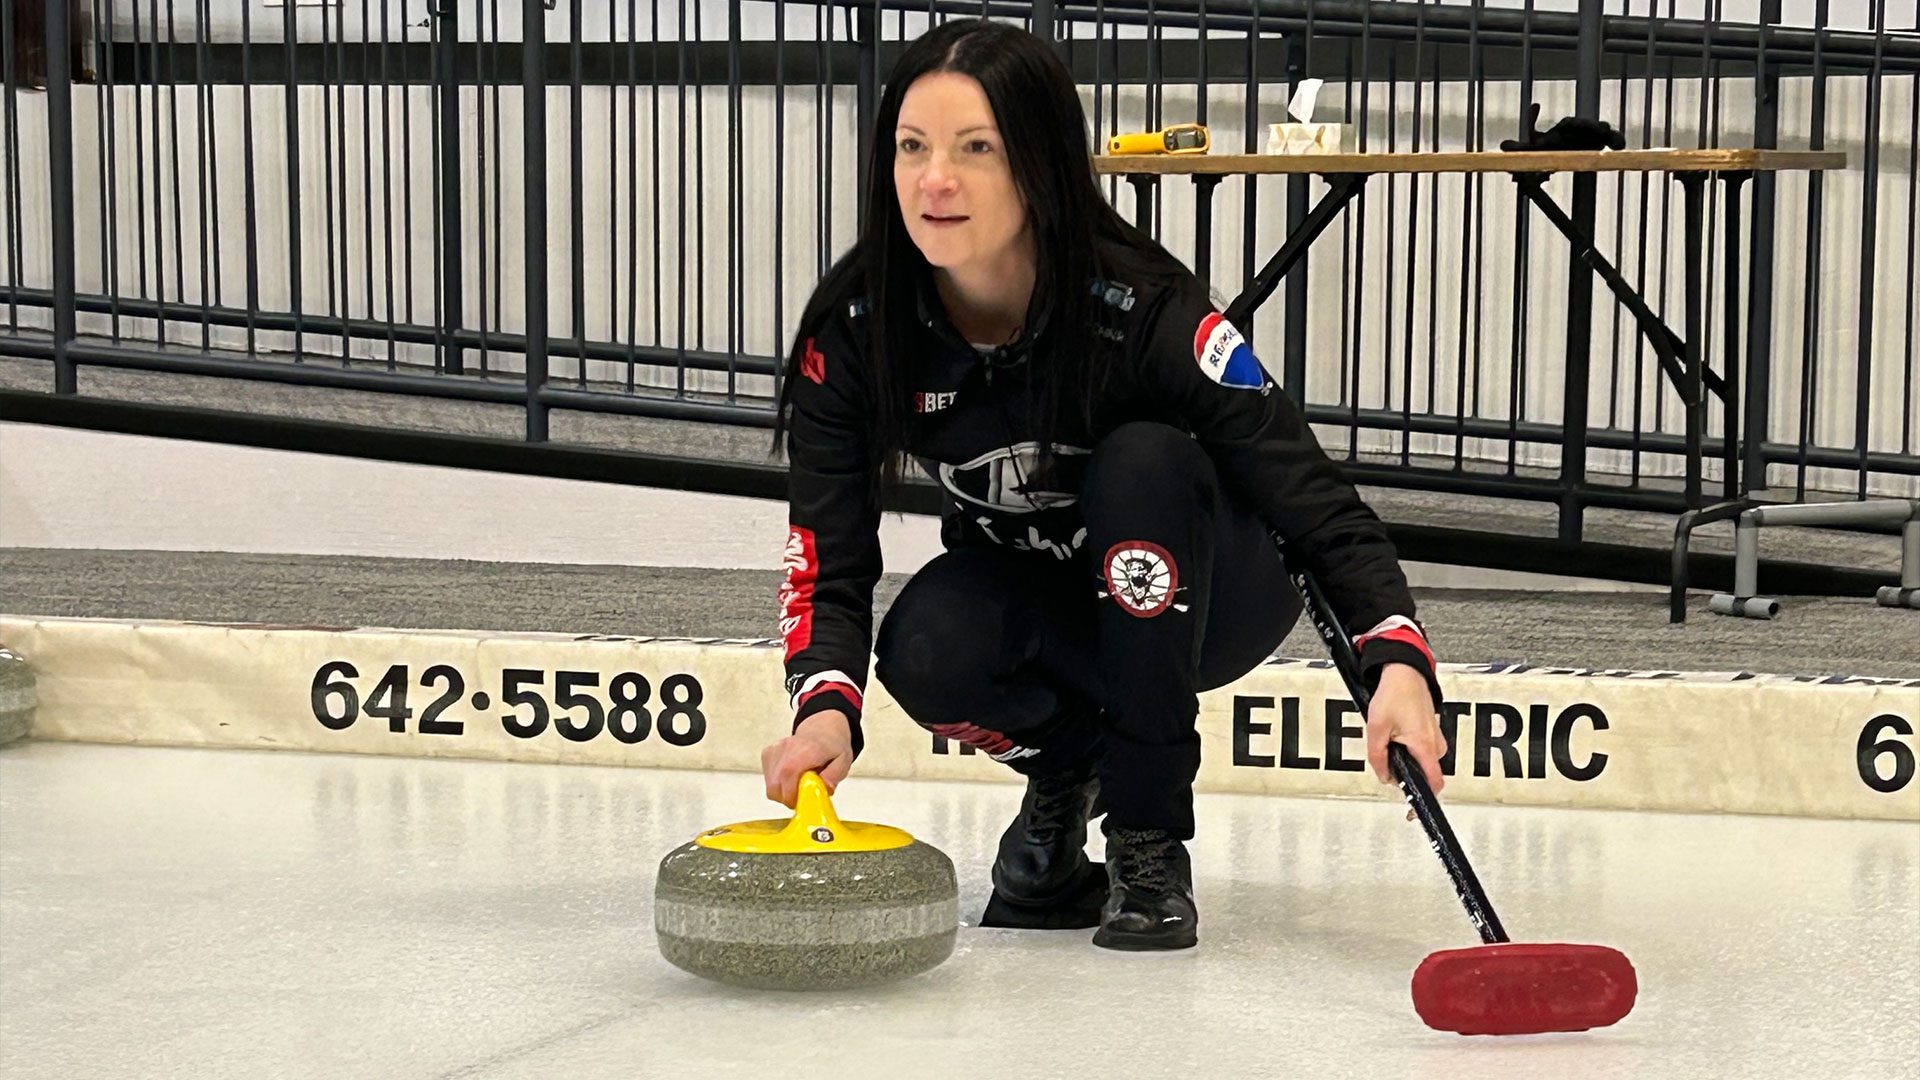 Métis skip going for gold at womens world curling championship